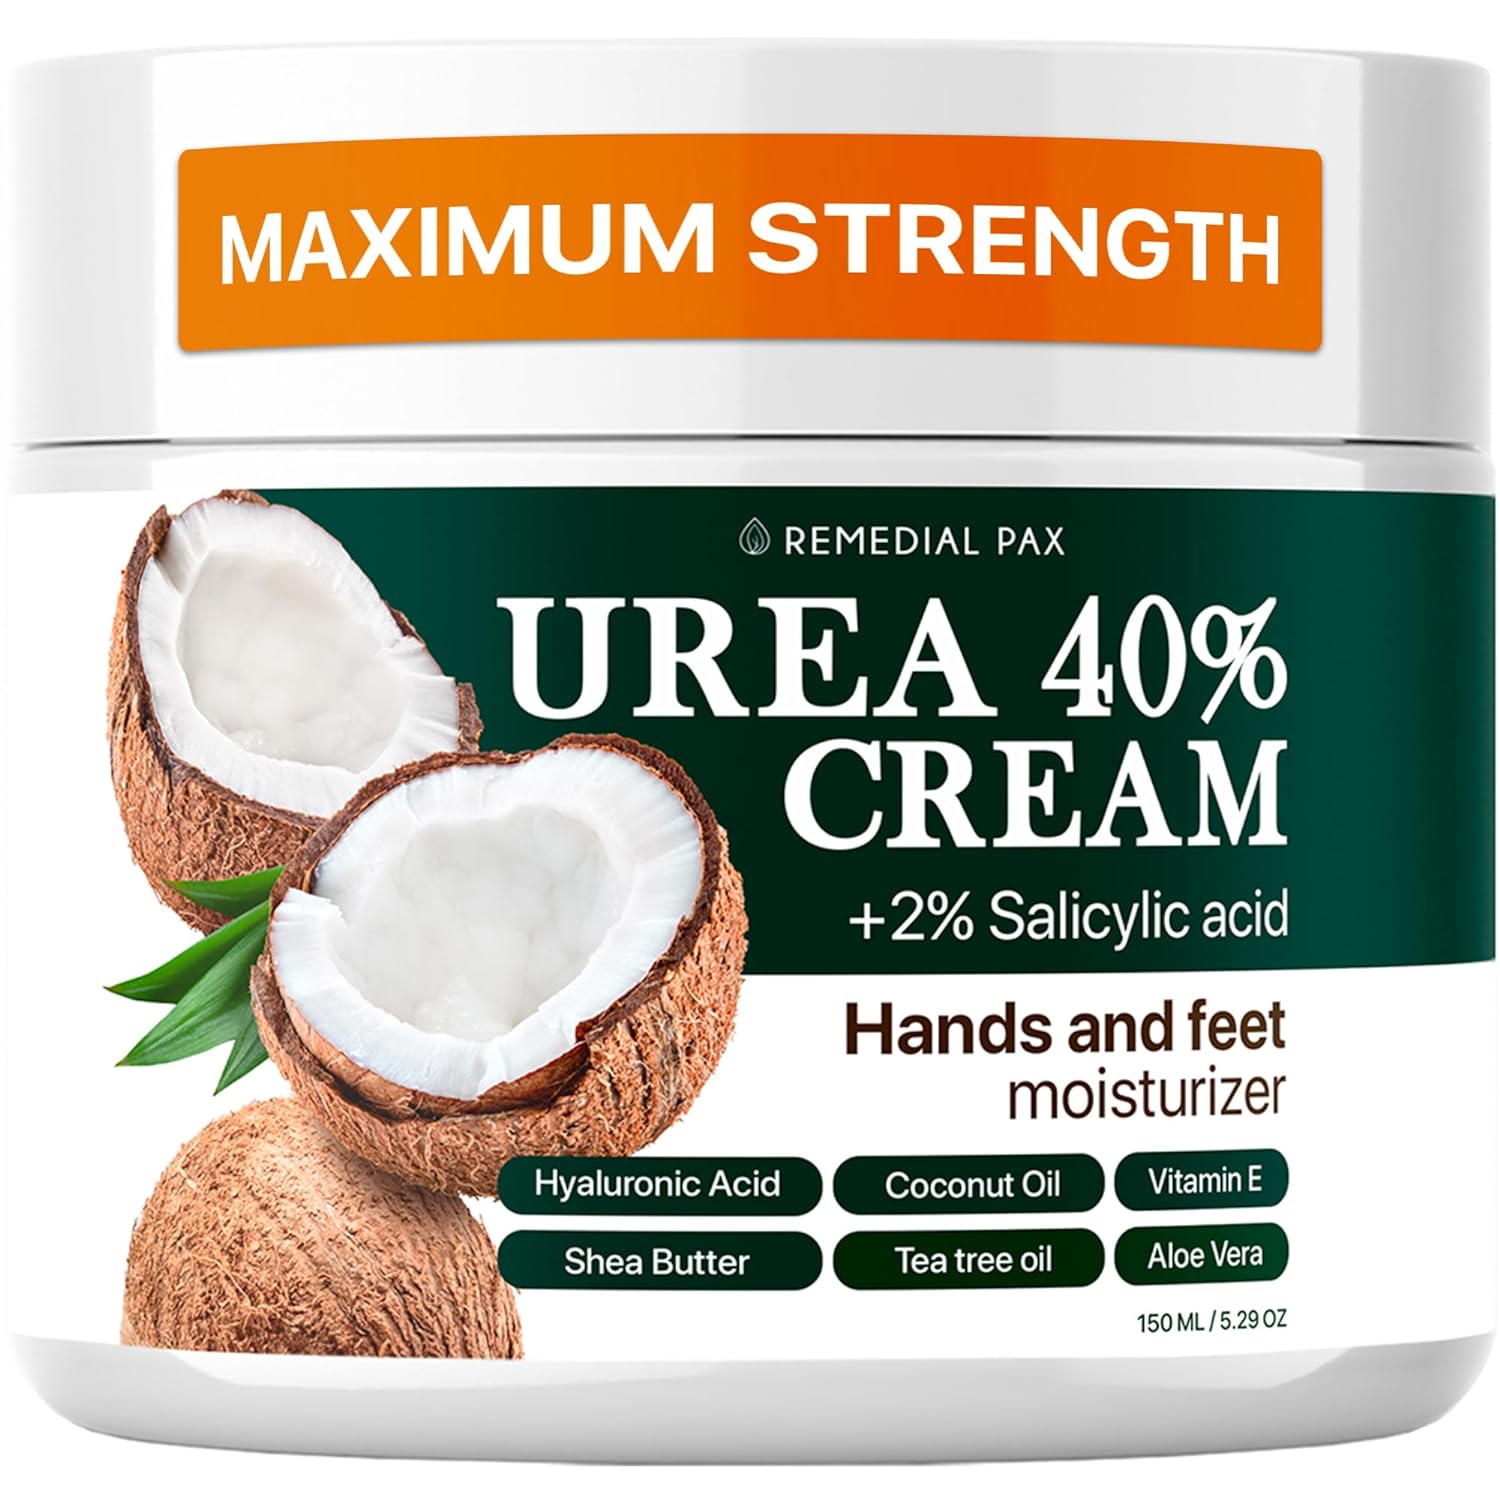 Urea Cream 40 Percent for Feet, 40% Urea Foot Cream for Dry Cracked Heels Knees Elbows Callus Hands Repair Treatment with 2% Salicylic Acid, Foot Moisturizer, Dead Skin Remover, Softener for Feet Care